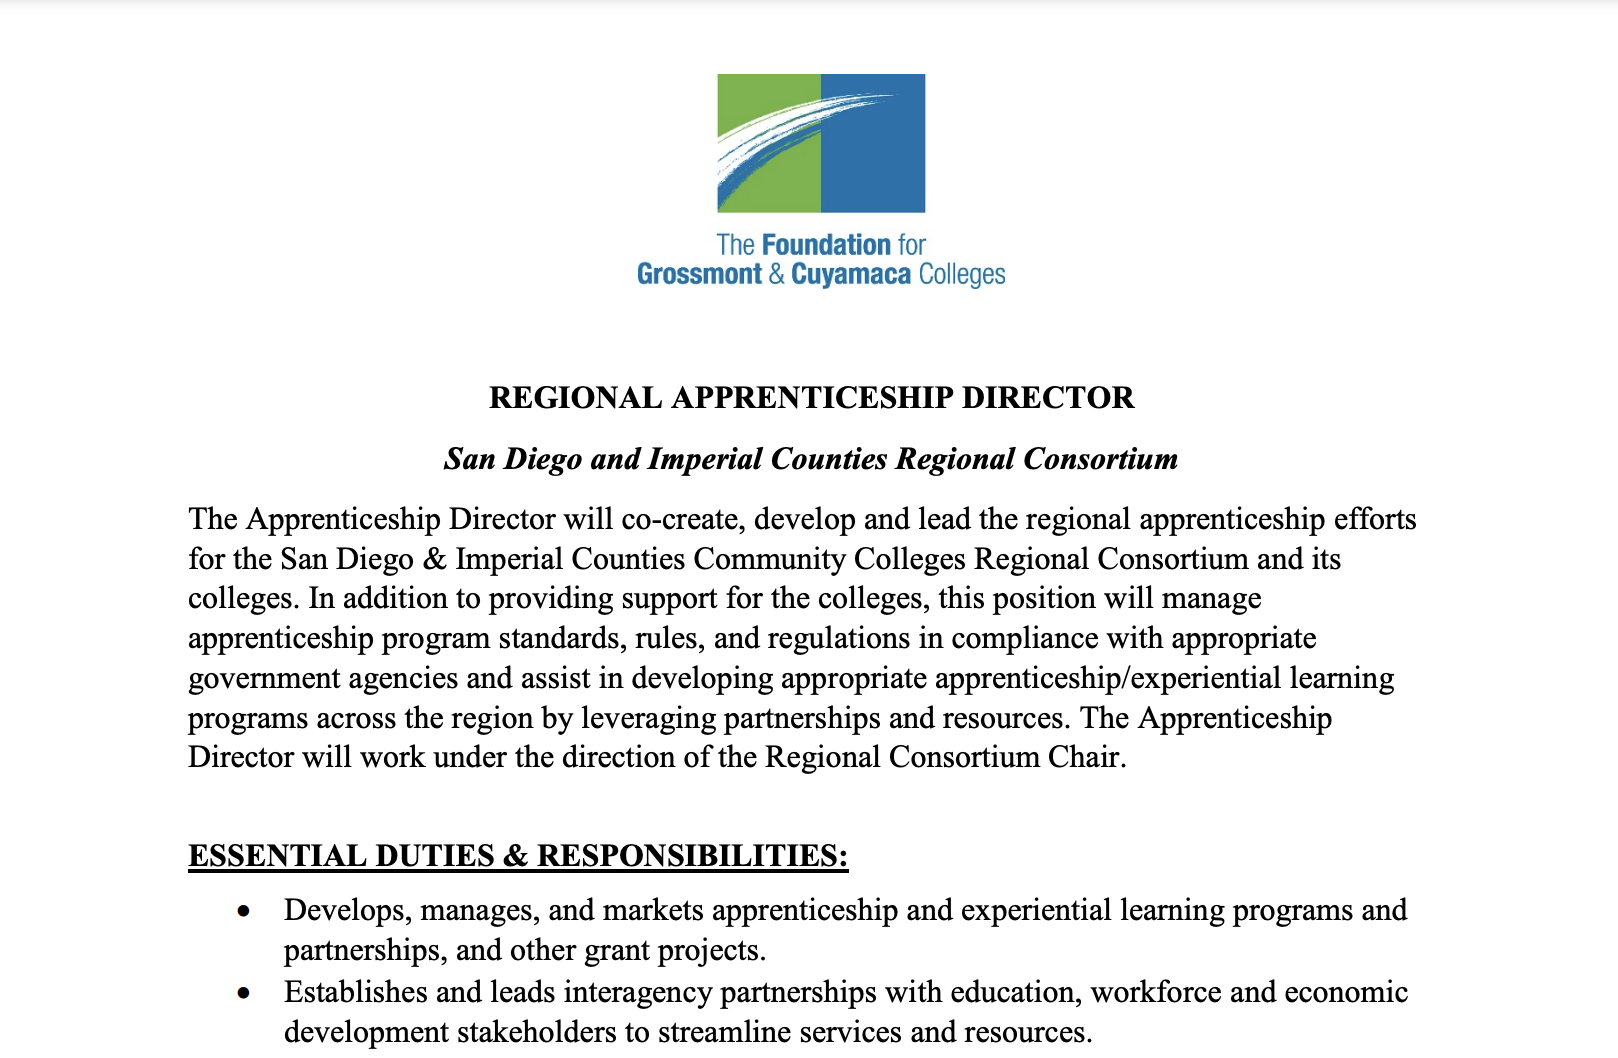 The Foundation for Grossmont & Cuyamaca Colleges is calling for applicants for the Regional Apprenticeship Director position for their San Diego and Imperial Counties Regional Consortium. 